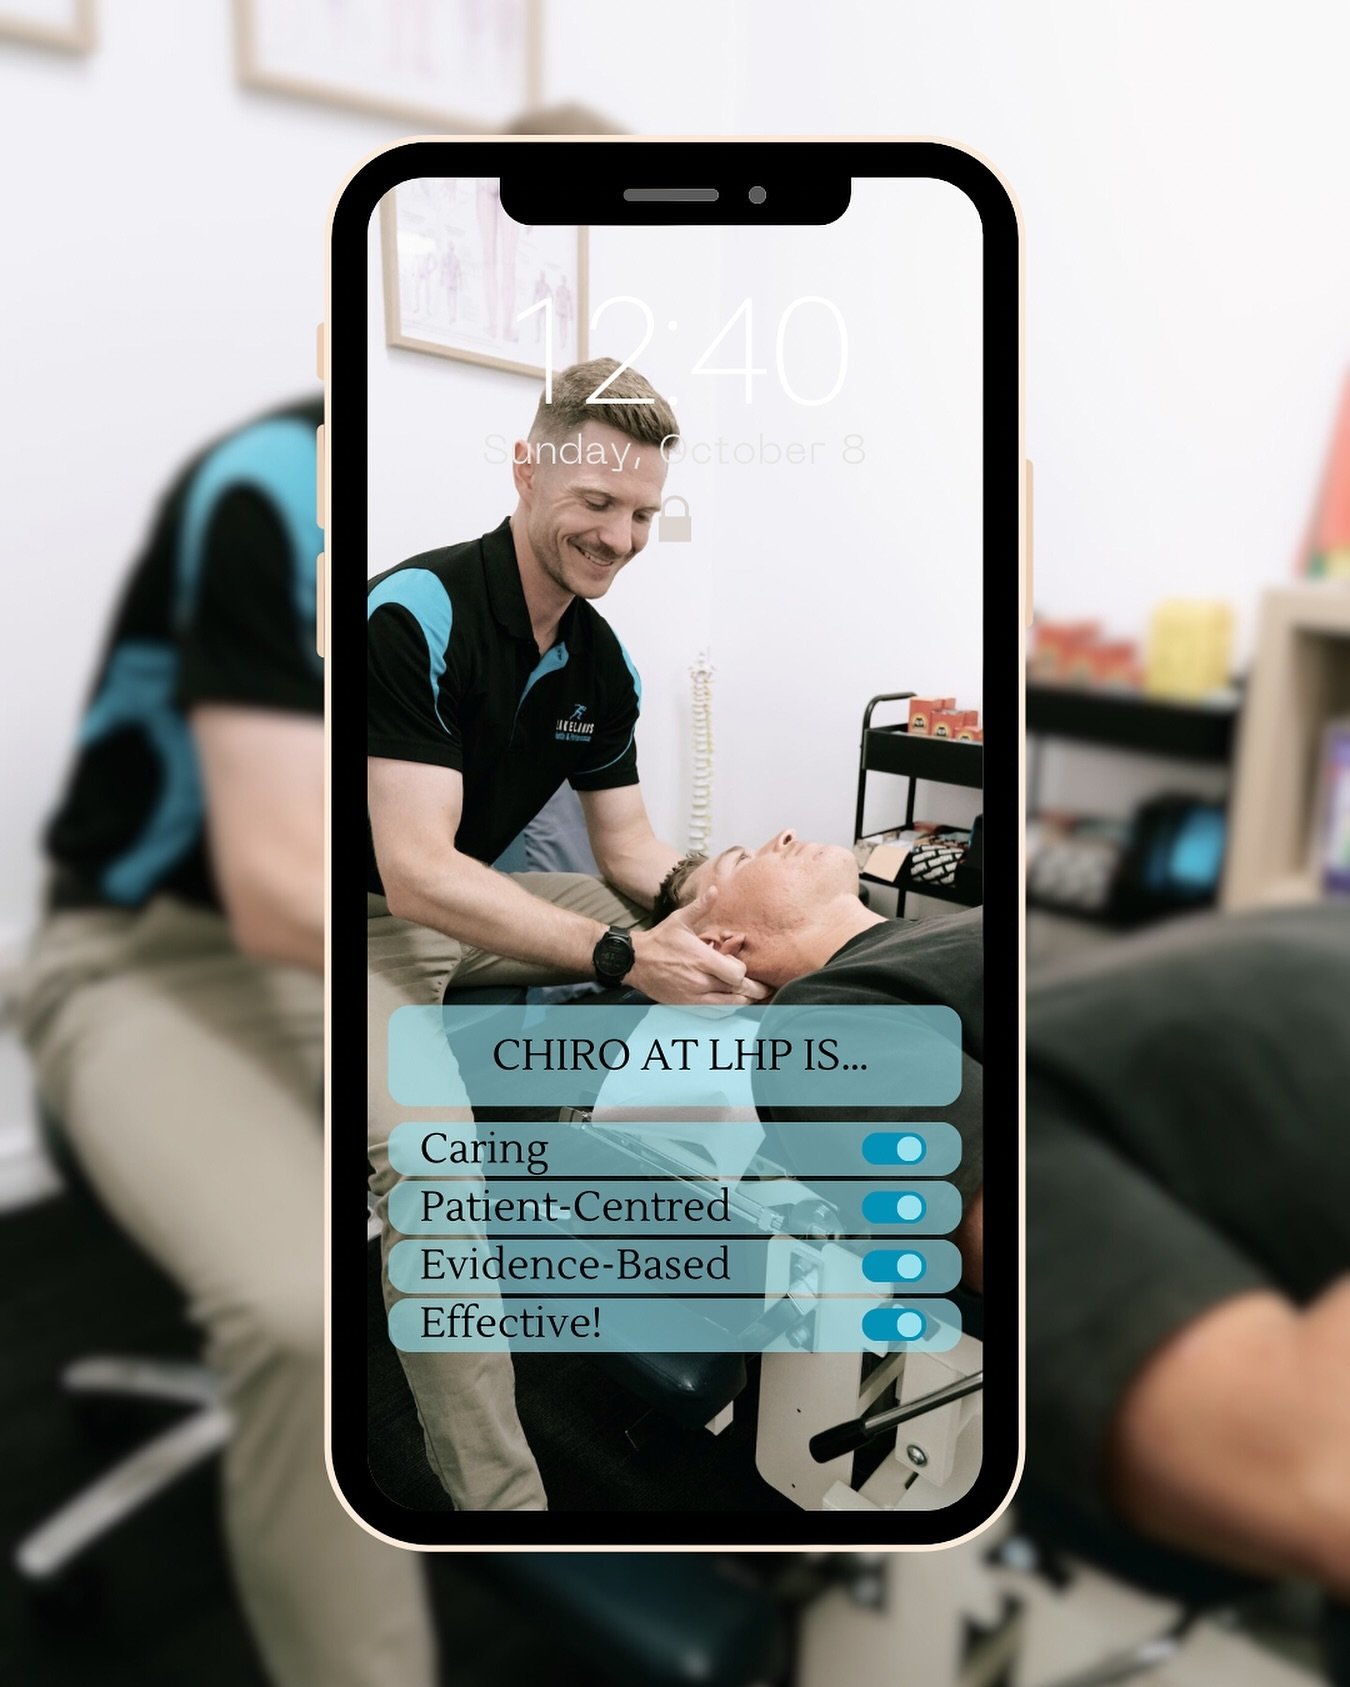 At LHP we combine the best of the chiropractic profession with strength and conditioning principles and exercise rehabilitation to help you achieve your goals. 

Come see what Chiro at LHP is all about!
&mdash;&mdash;
📞0403 258 582
💻Book Online
⭐️C